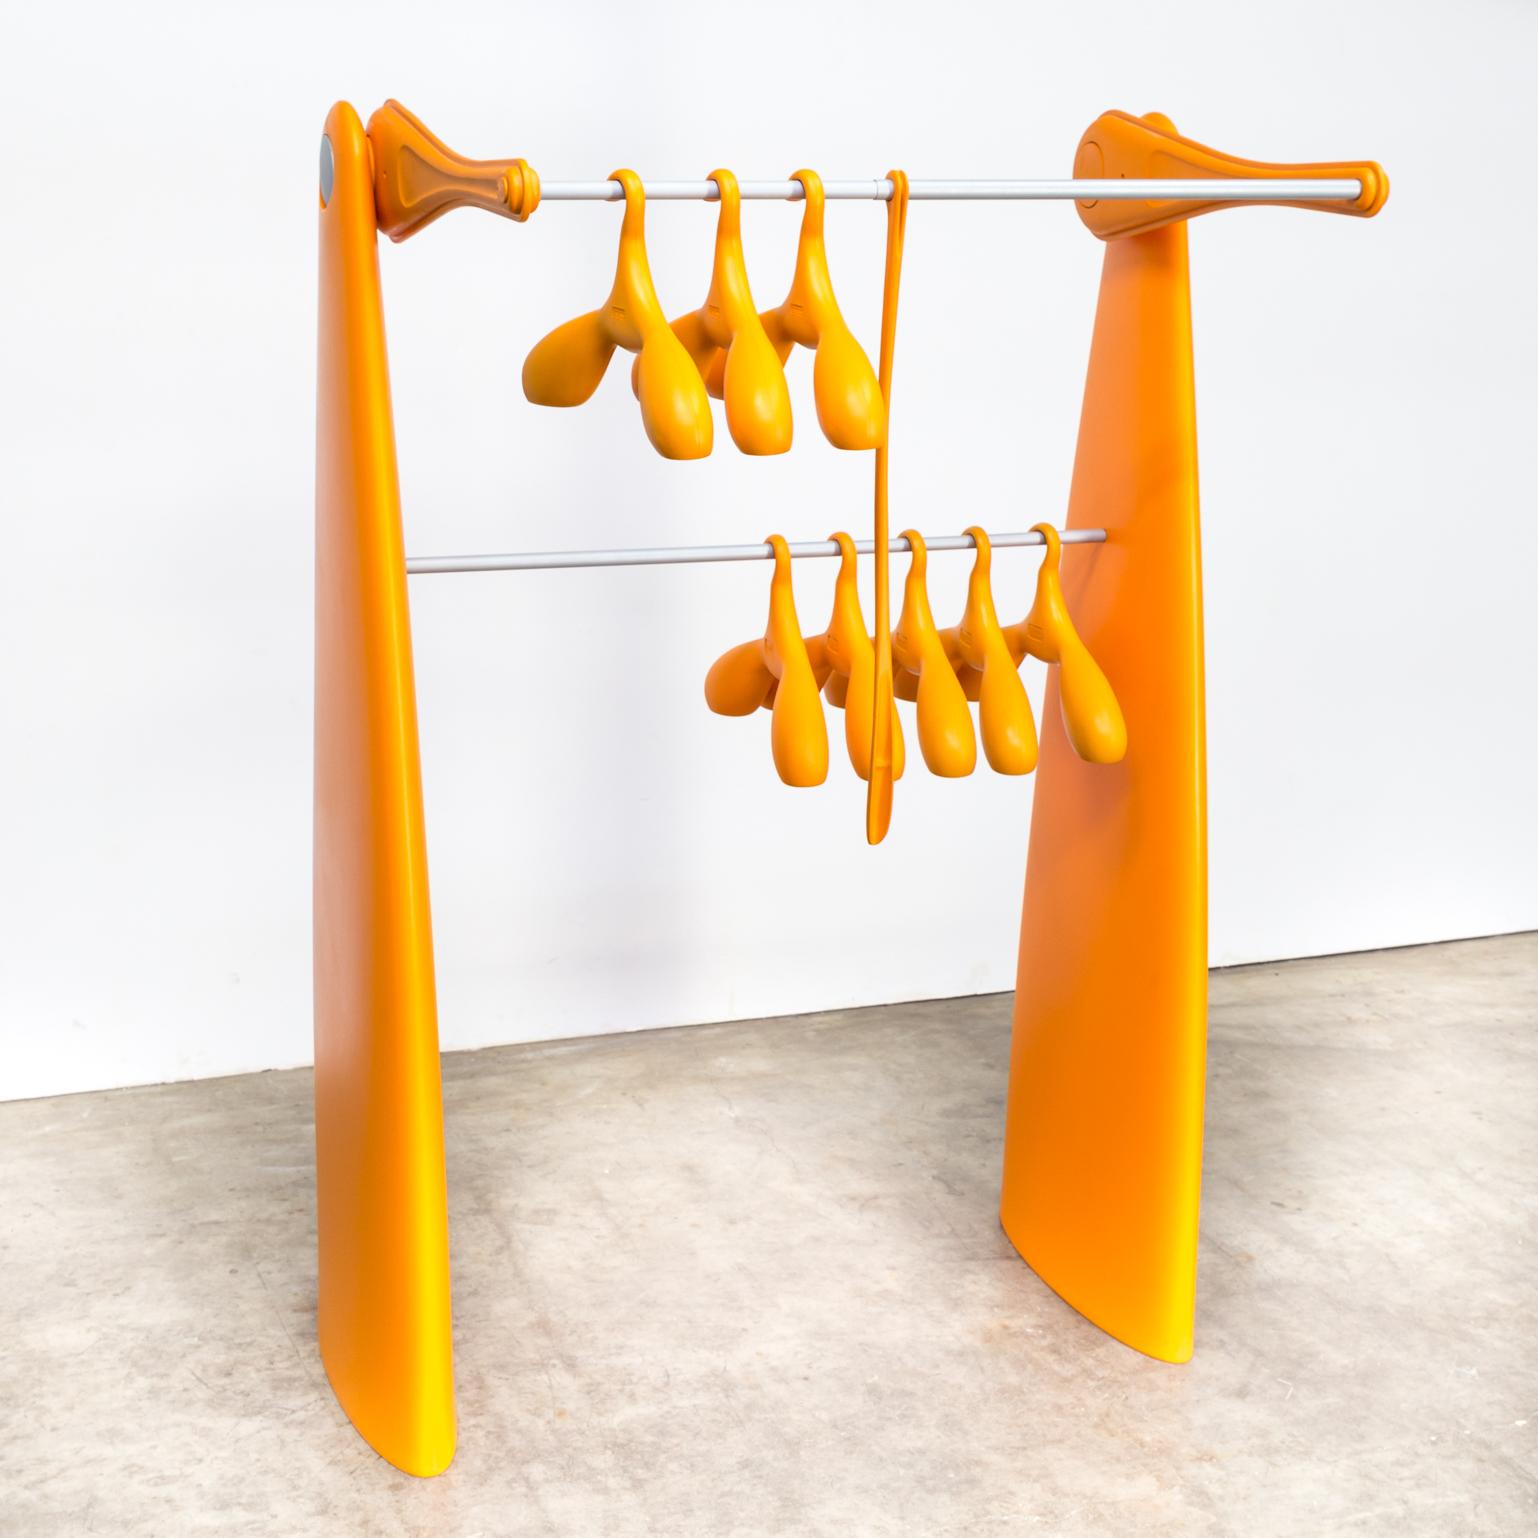 E. Terragni Coat Stand ‘Atelier’ & Servetto Lift and Dino Clothes Hangers im Angebot 3